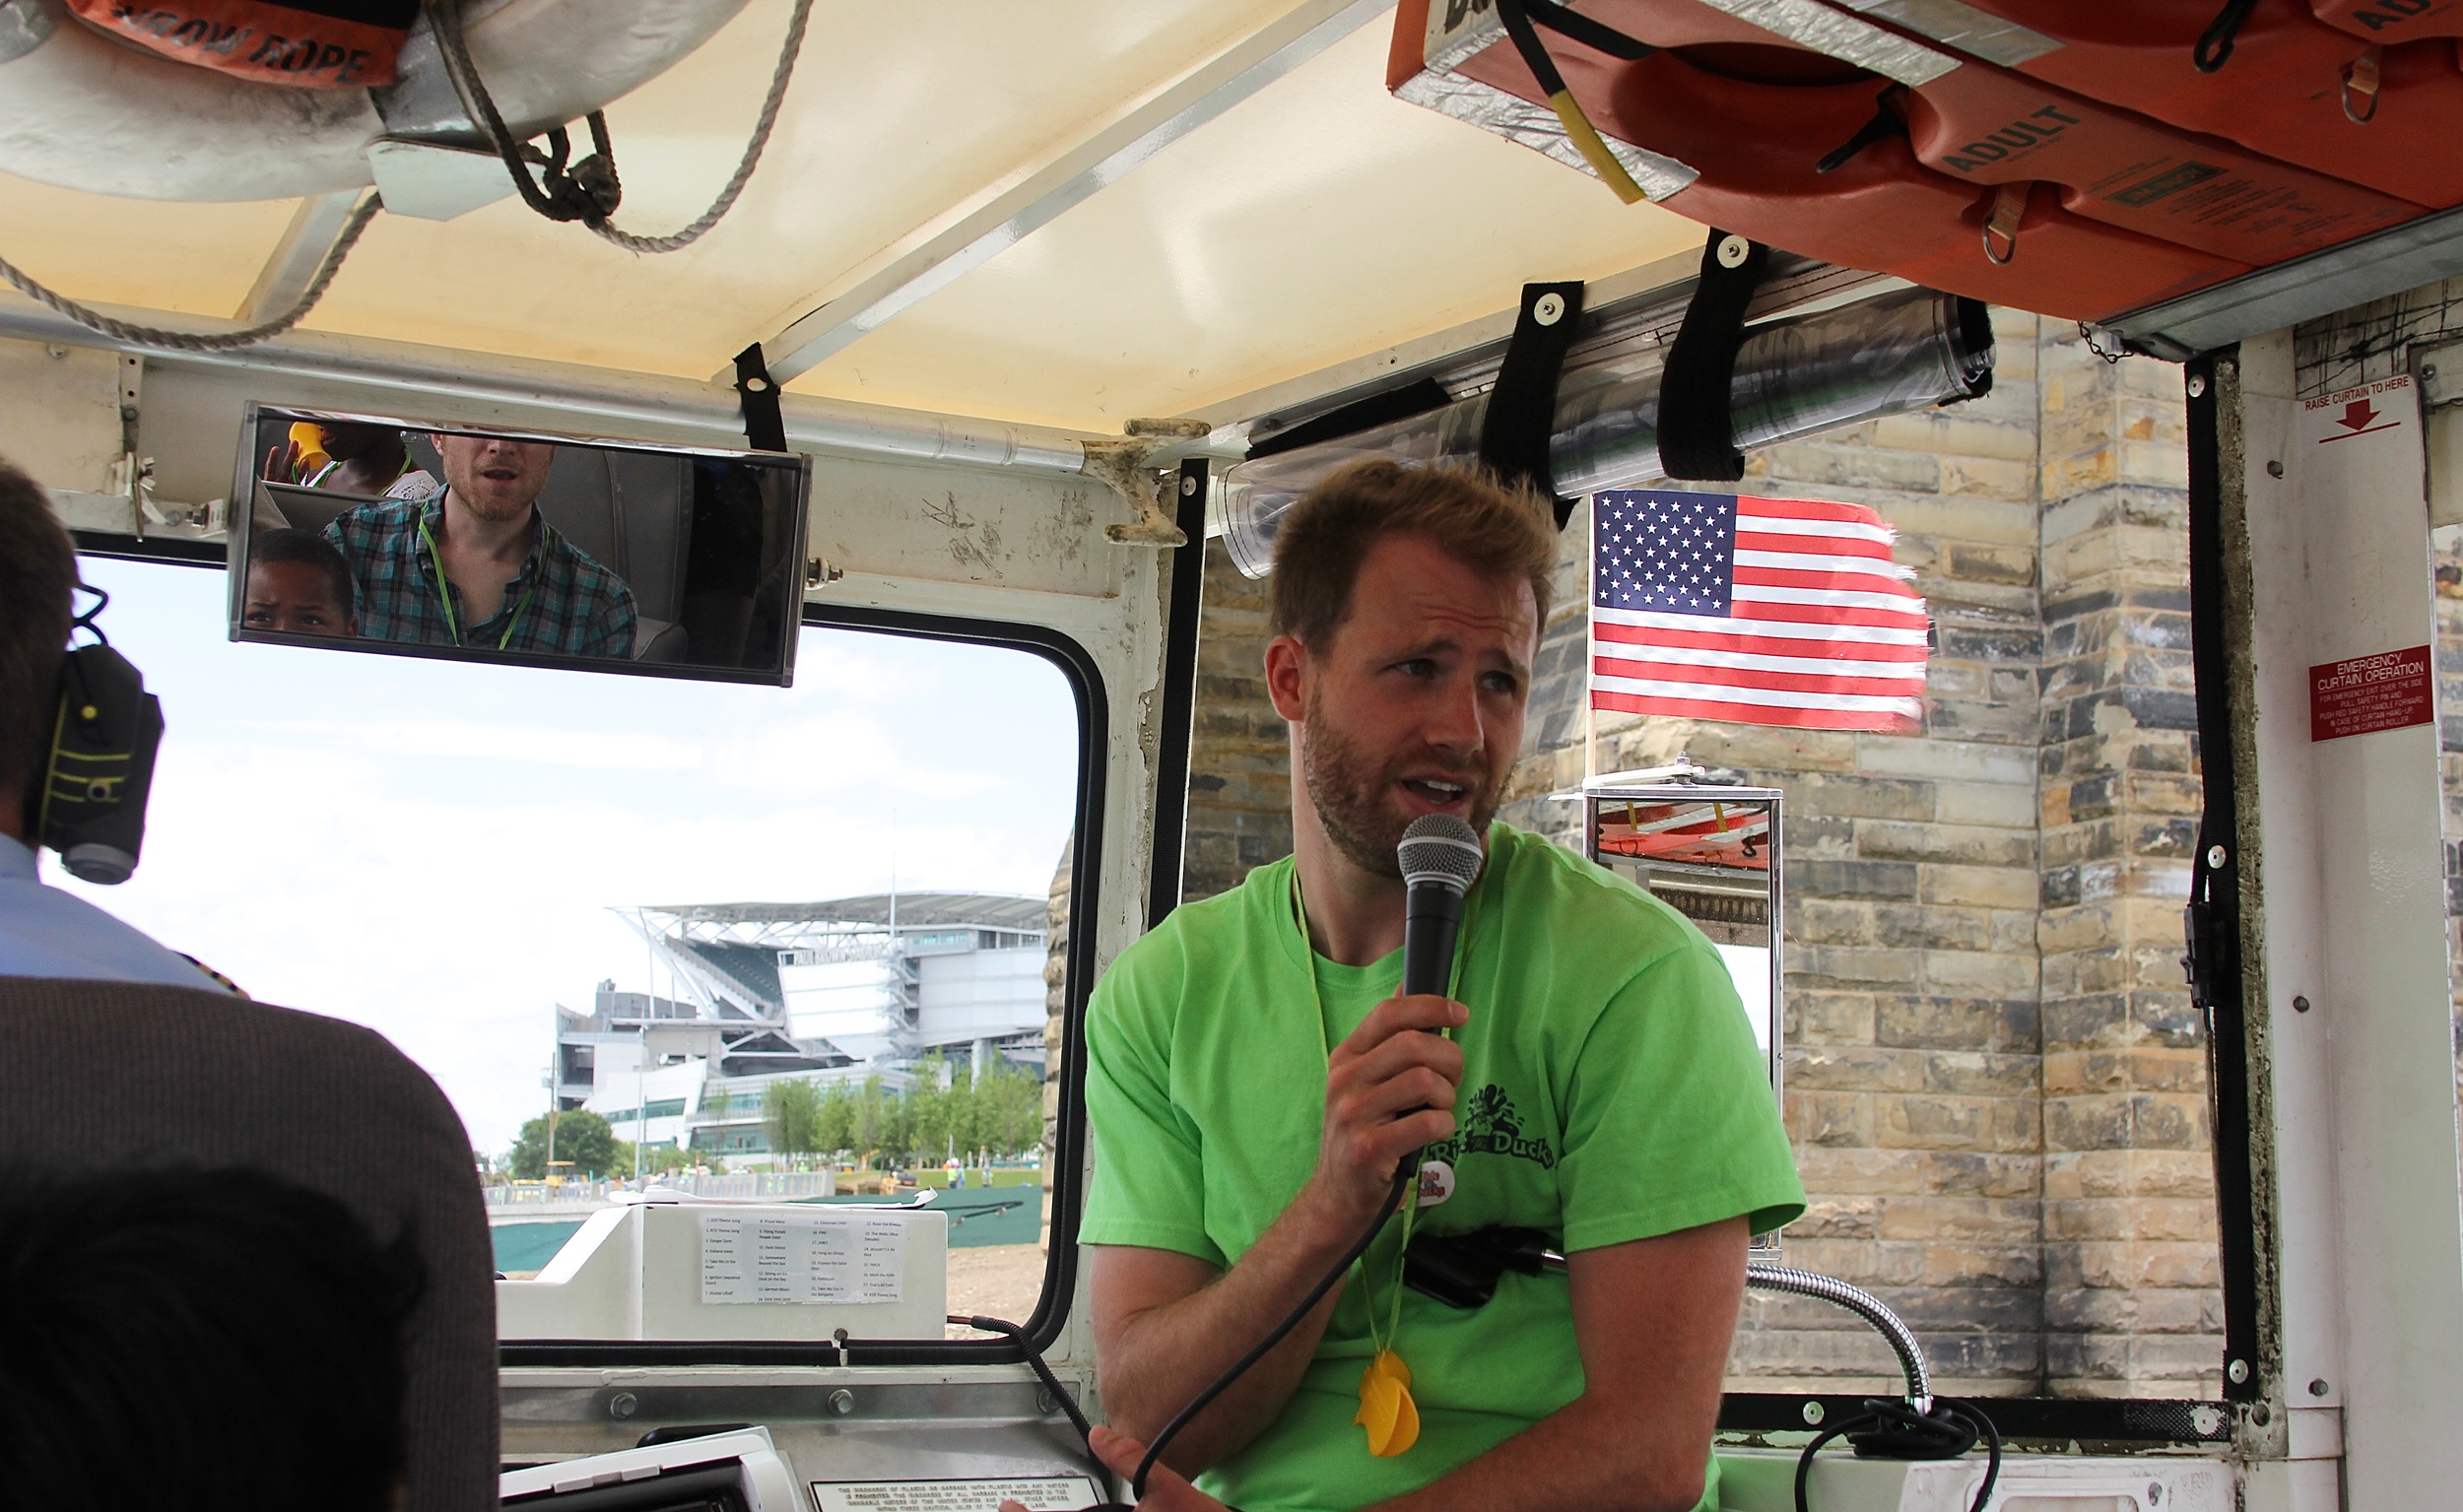  Our amazing host and duck boat guide, Zak Slemmer 